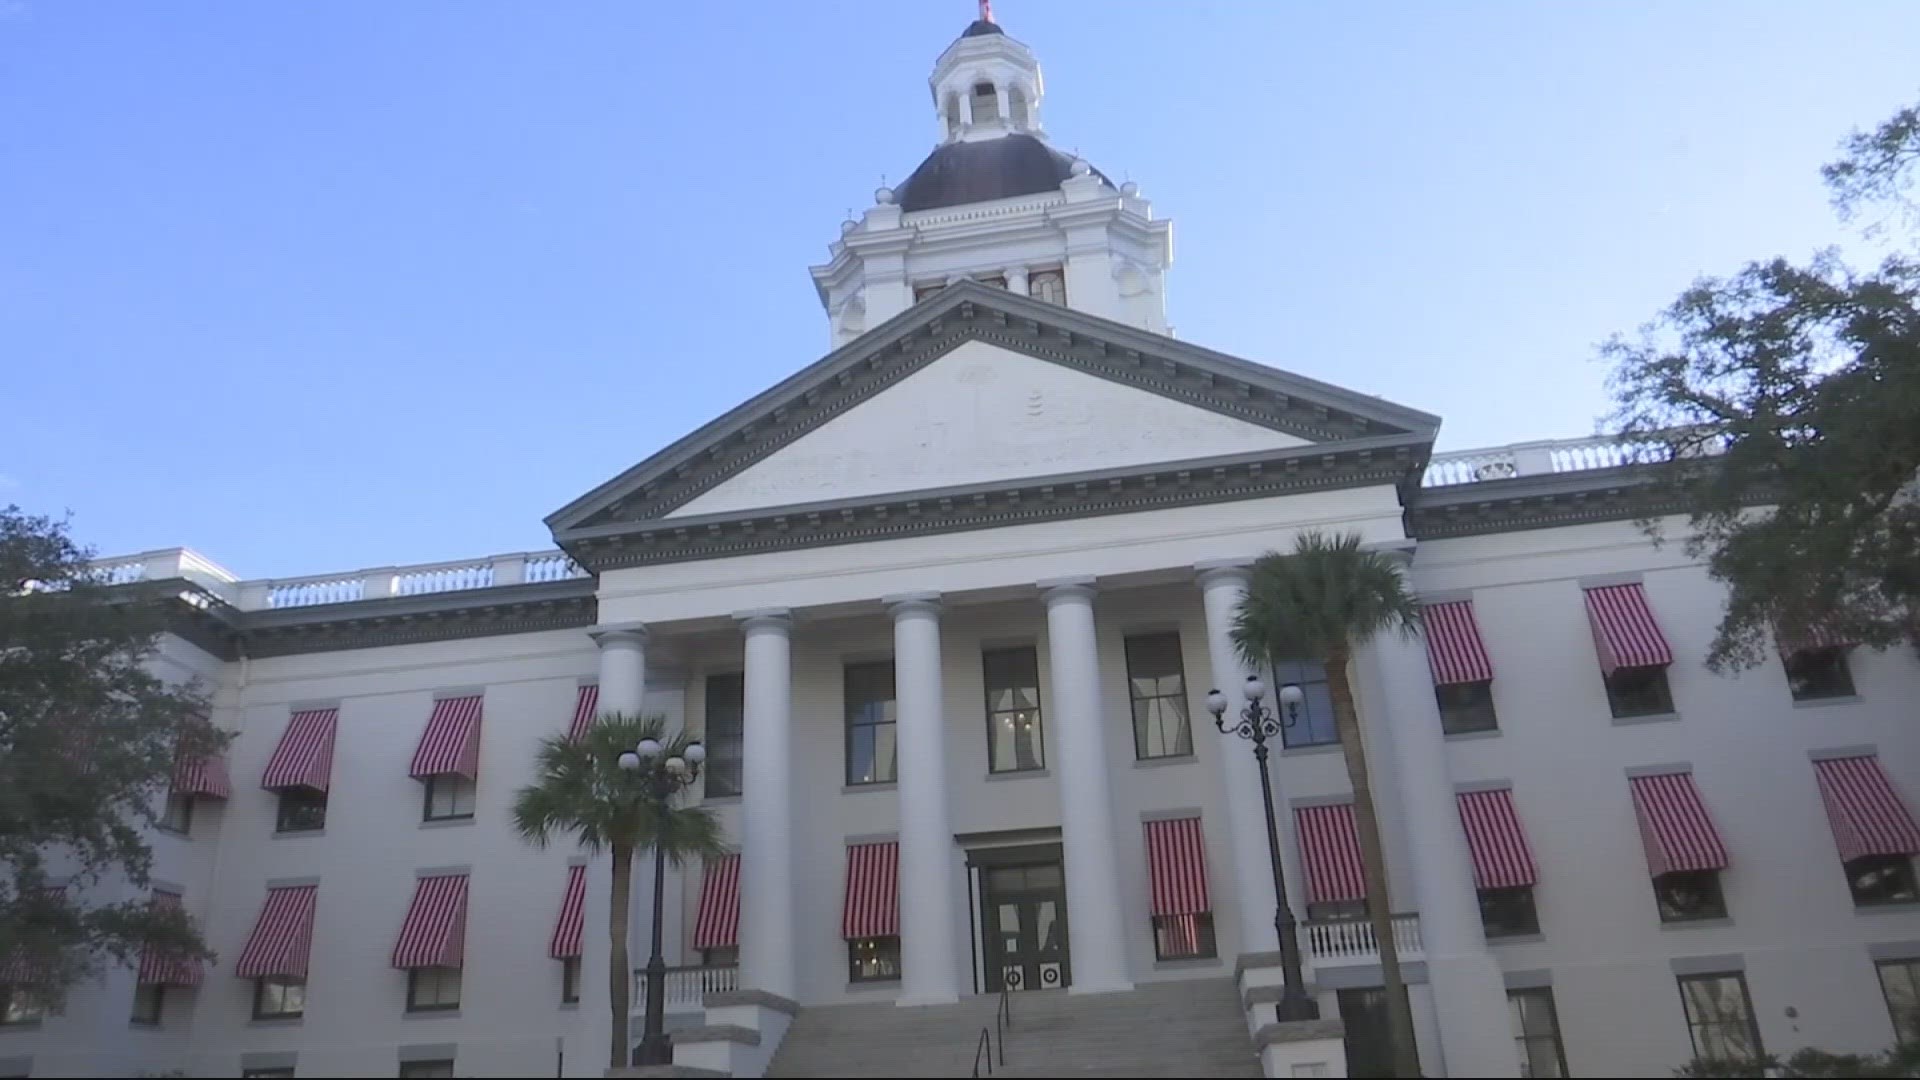 The Live Local Act allots more than $700 million for affordable housing projects. Affordable housing advocates in Jacksonville say a tenant bill of rights is needed.